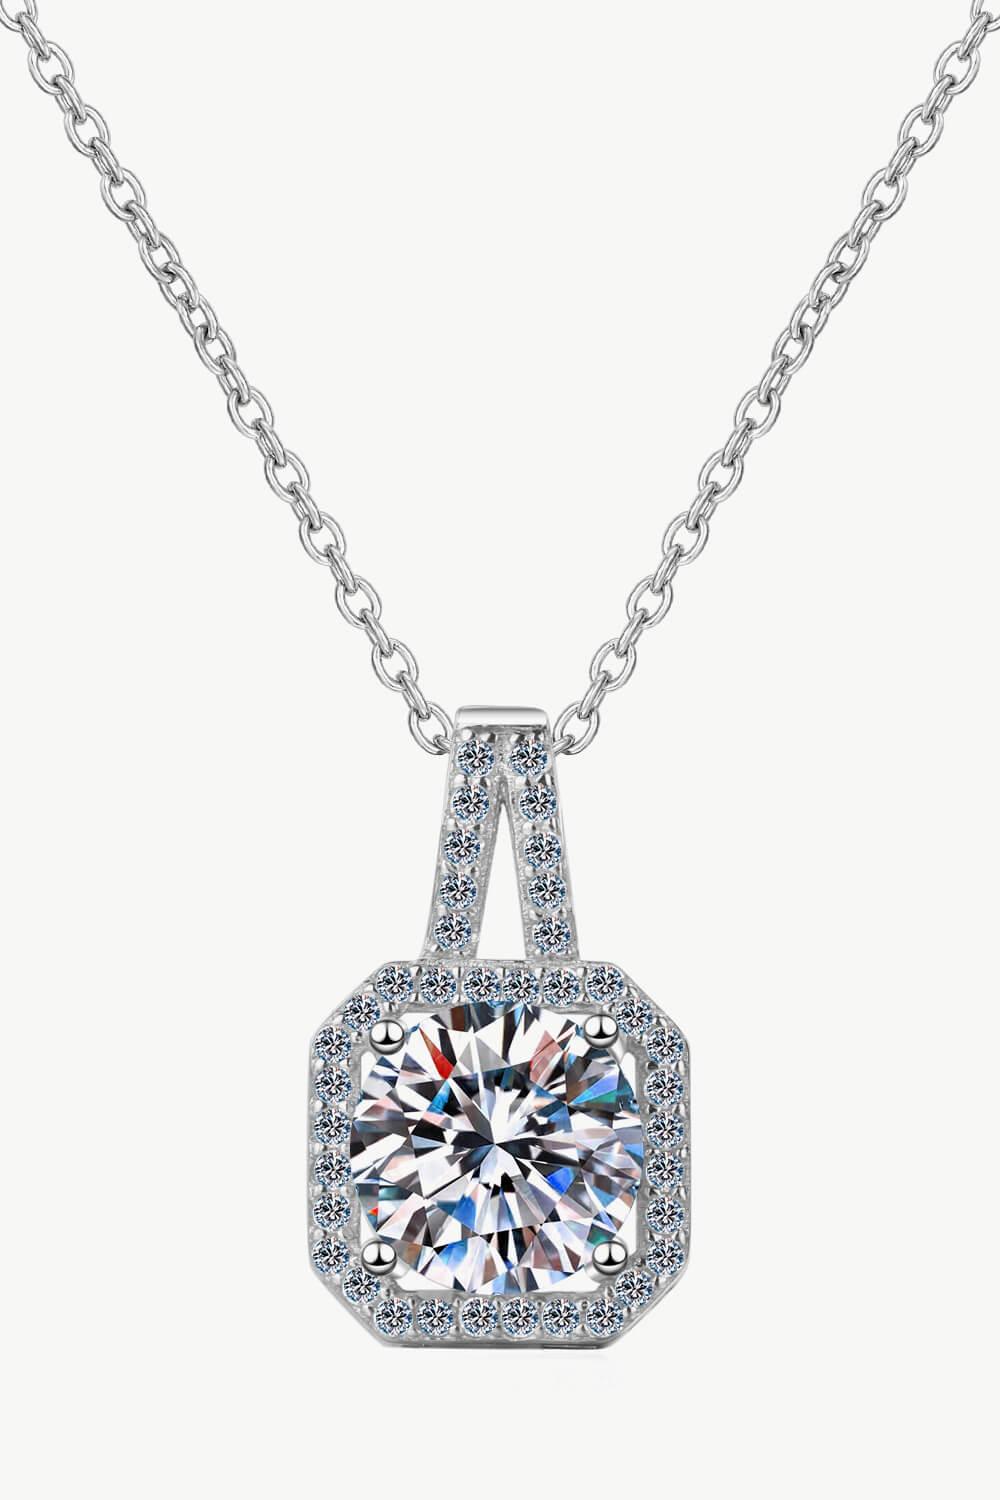 1 Carat Moissanite Necklace -A 1ct lab inlaid diamond with other cluster diamonds - gifts for her -#Firefly Lane Boutique1